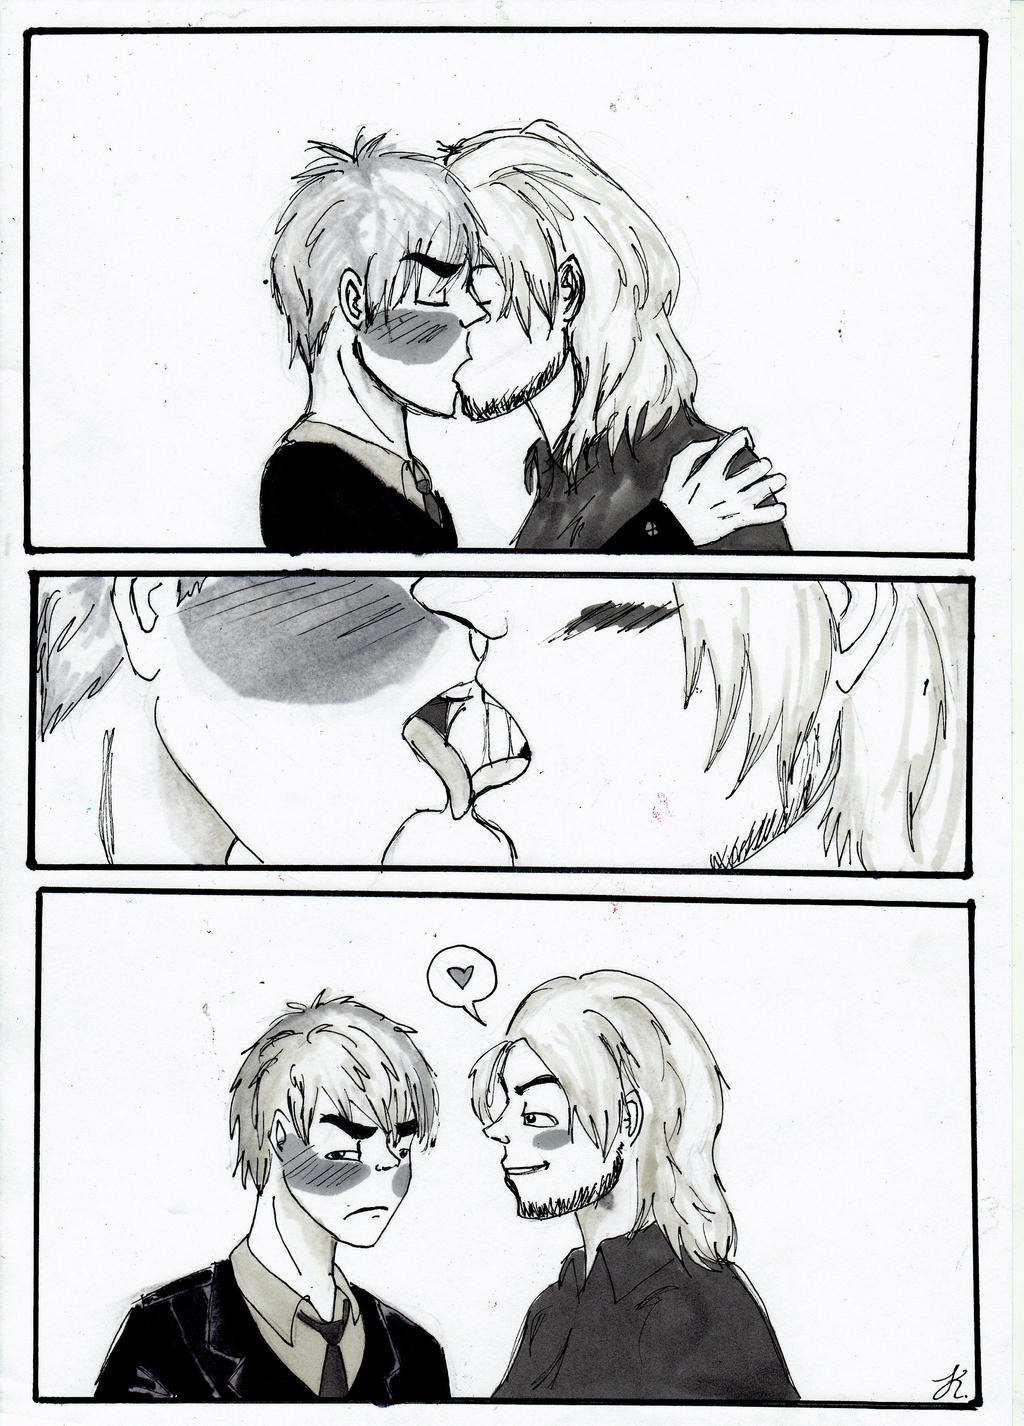 [request] French kiss by MsCarl555 on DeviantArt